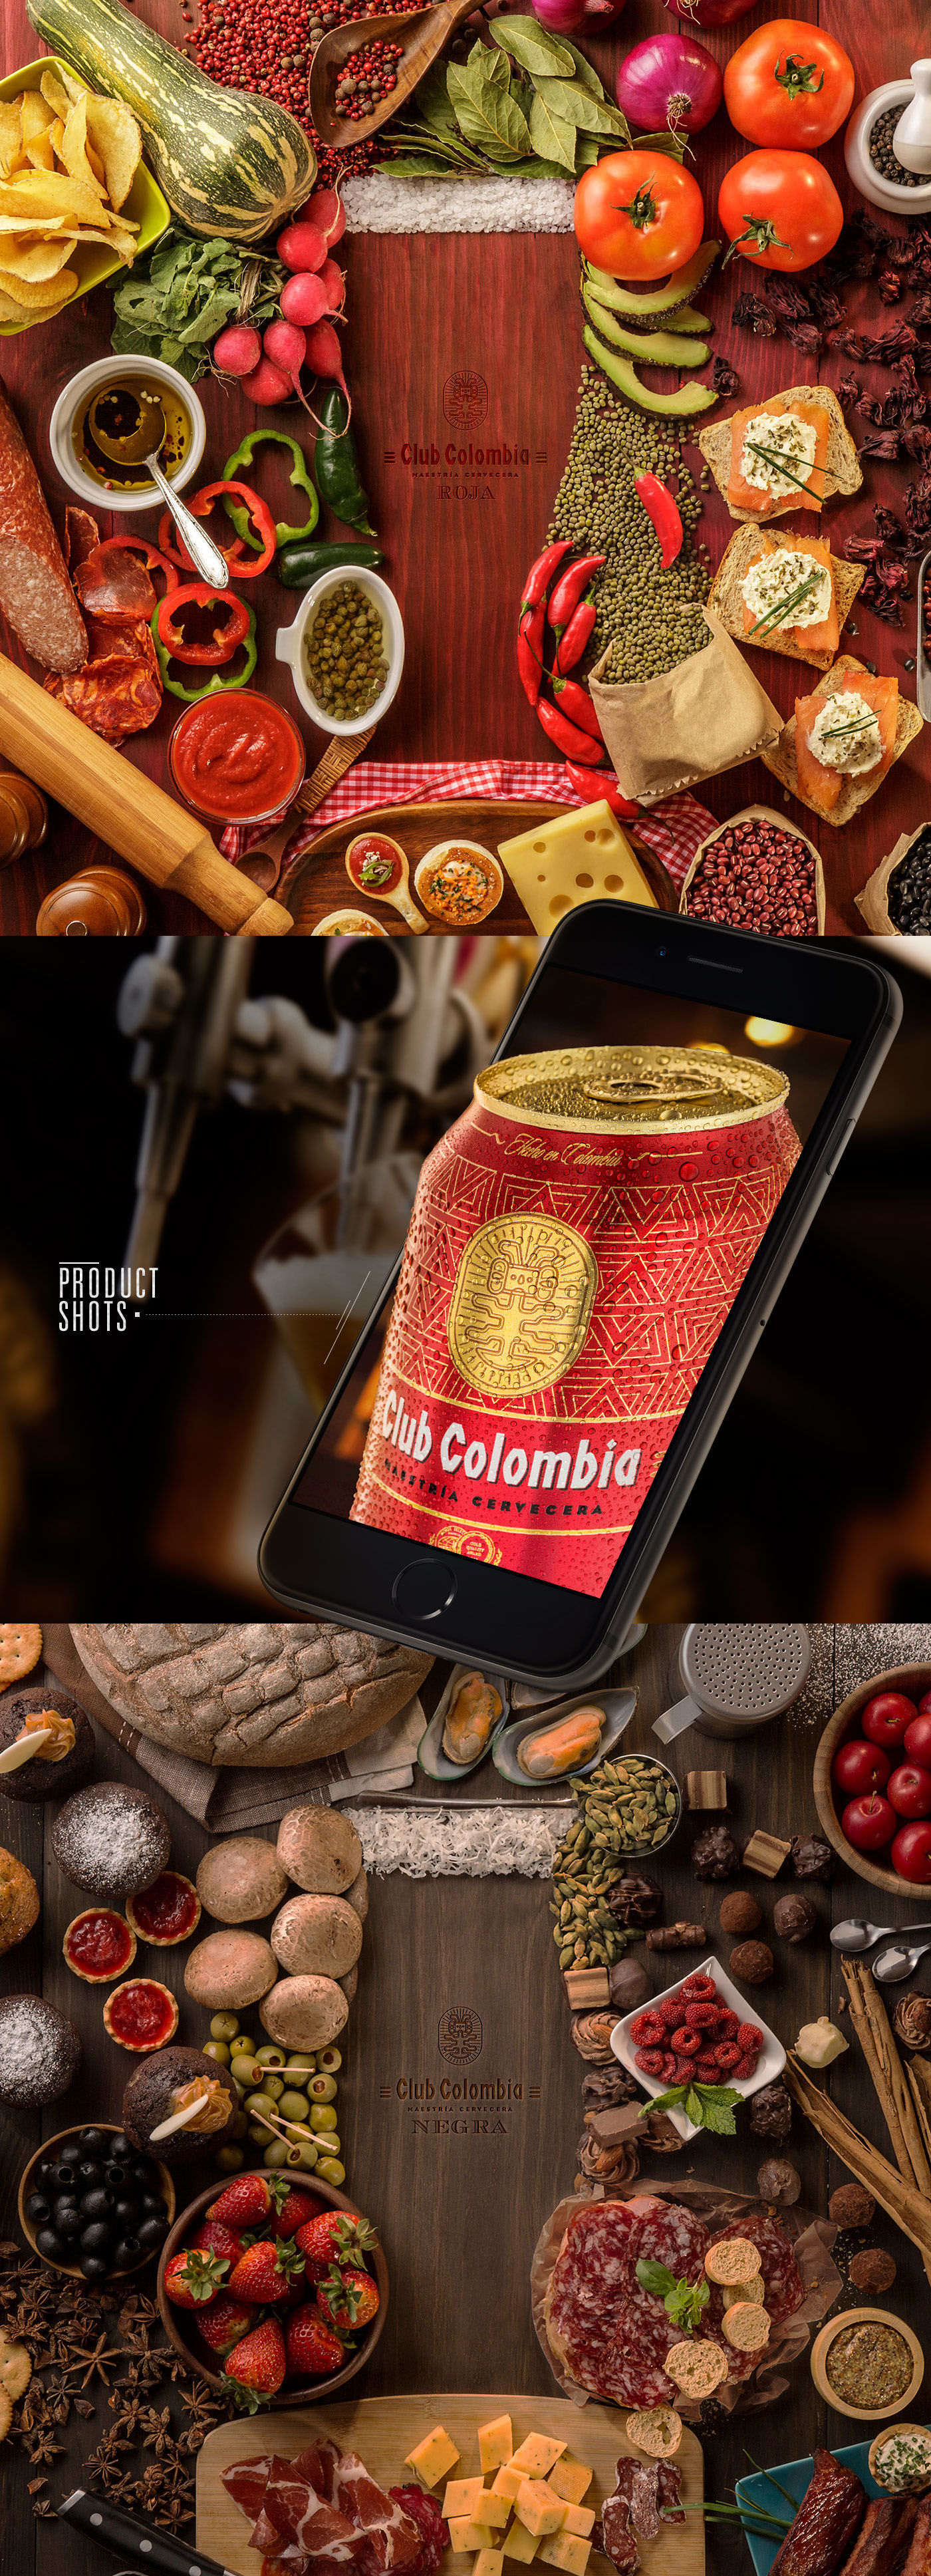 #ClubColombia club colombia beauty content beer design ArtDirection